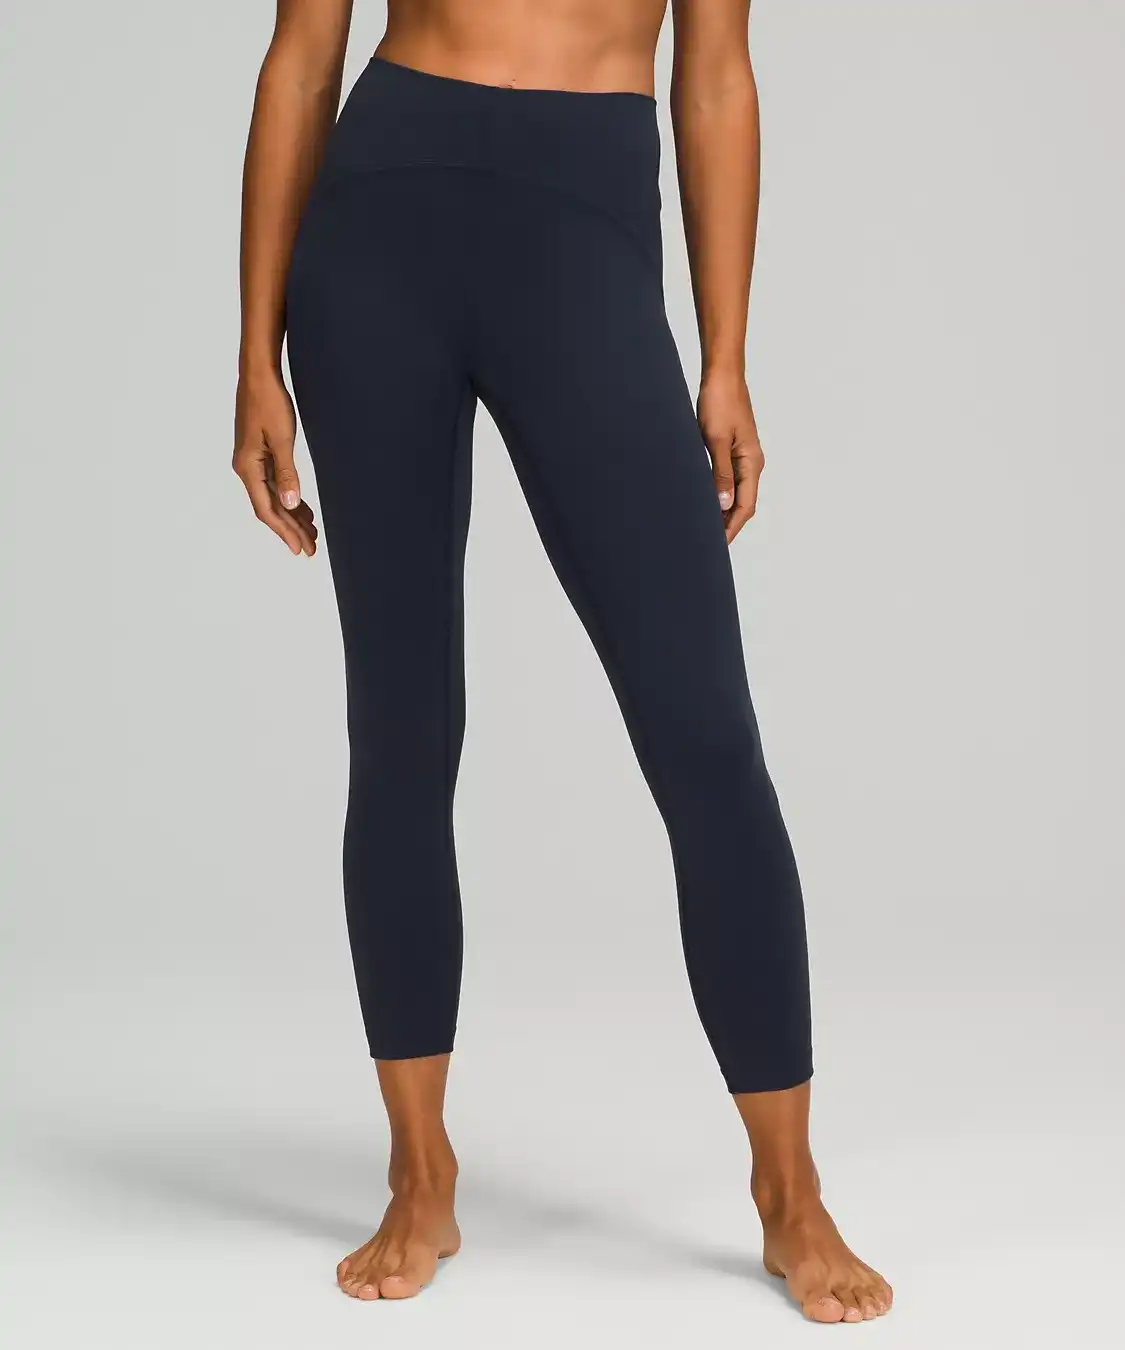 We Compared 13 of the Best Lululemon Leggings, So You Know Exactly What  You're Buying